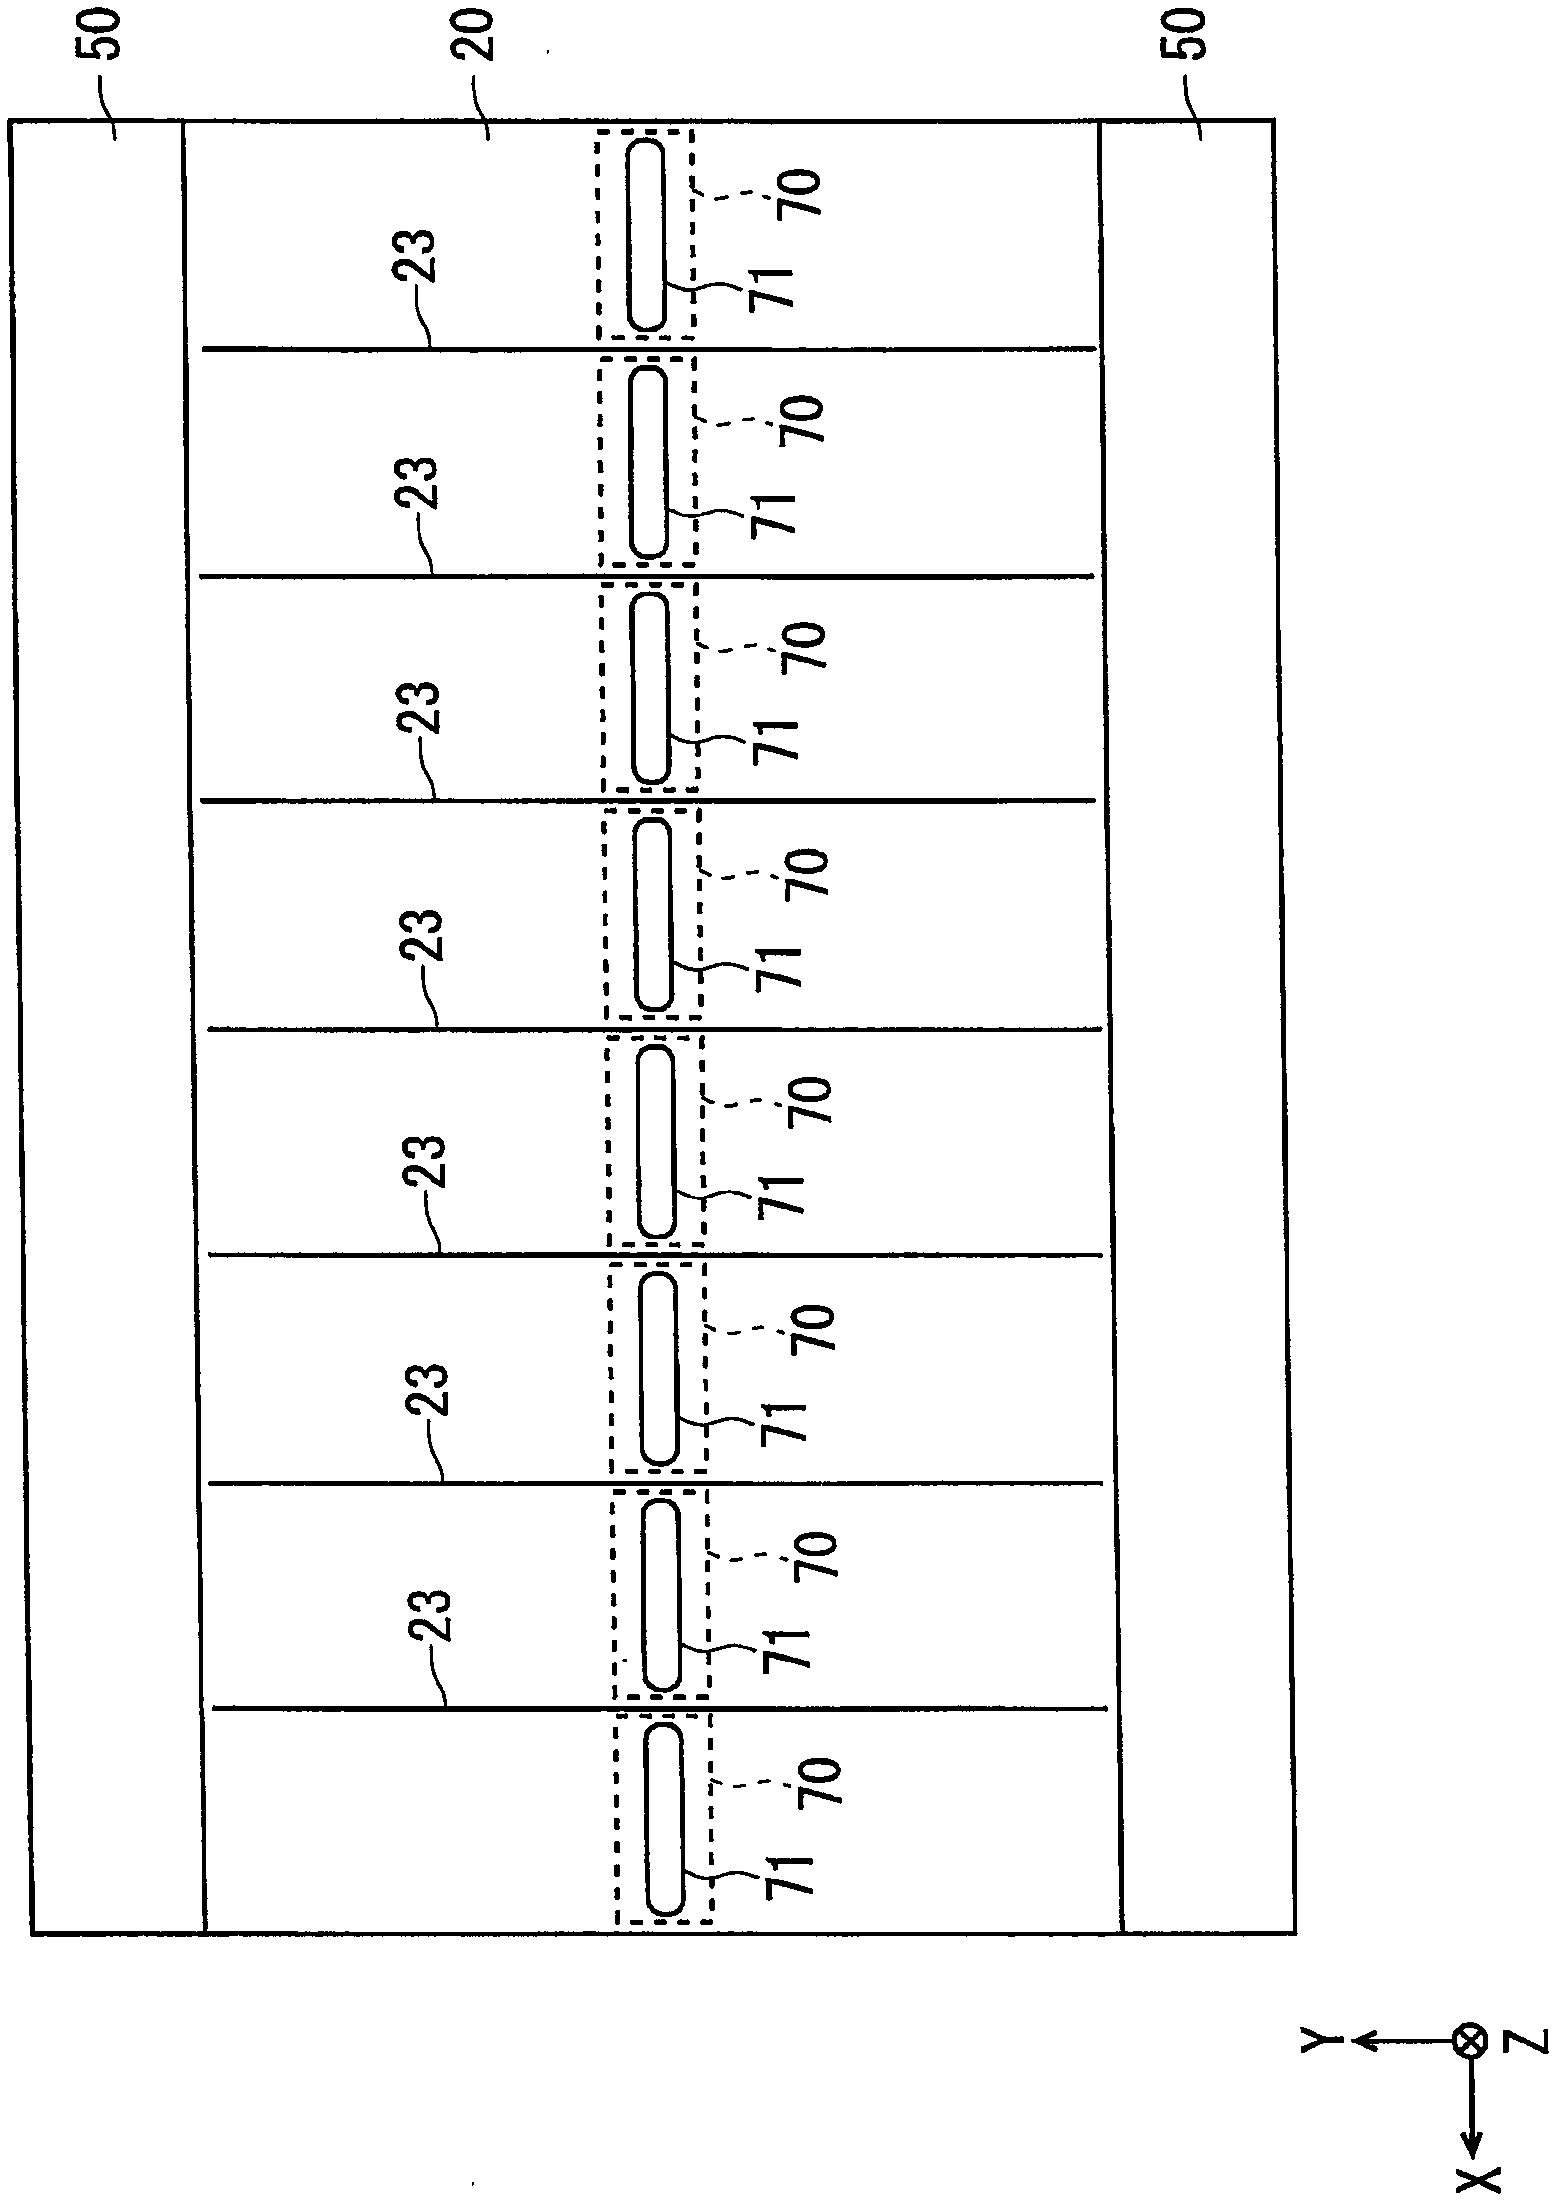 Substrate cooling apparatus